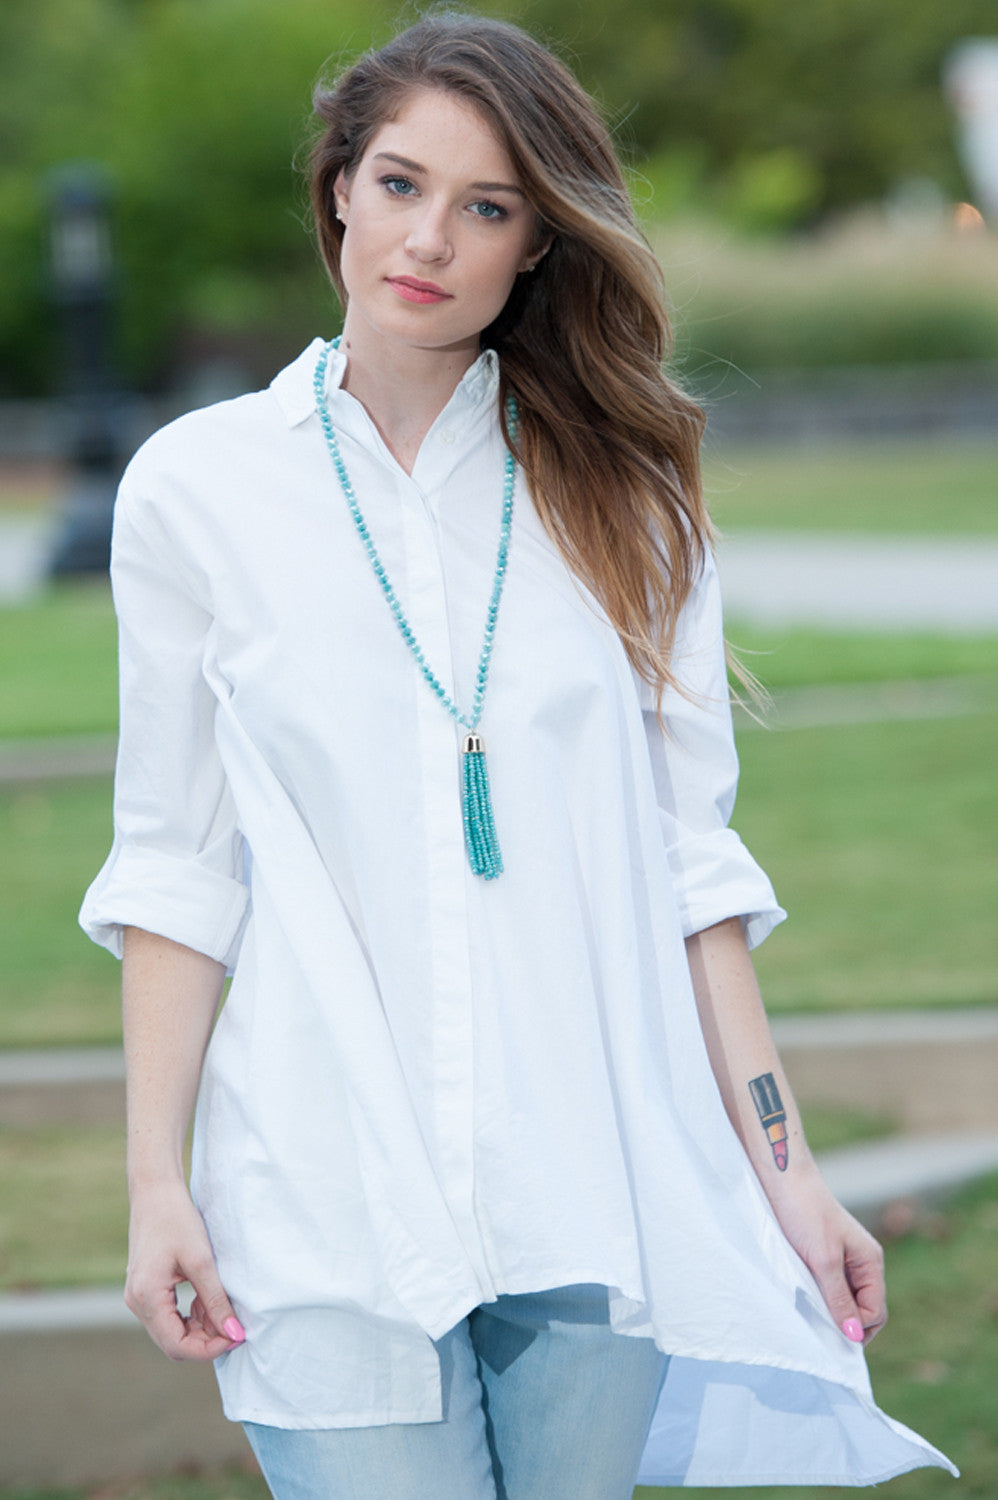 Boxy Shirt with flare